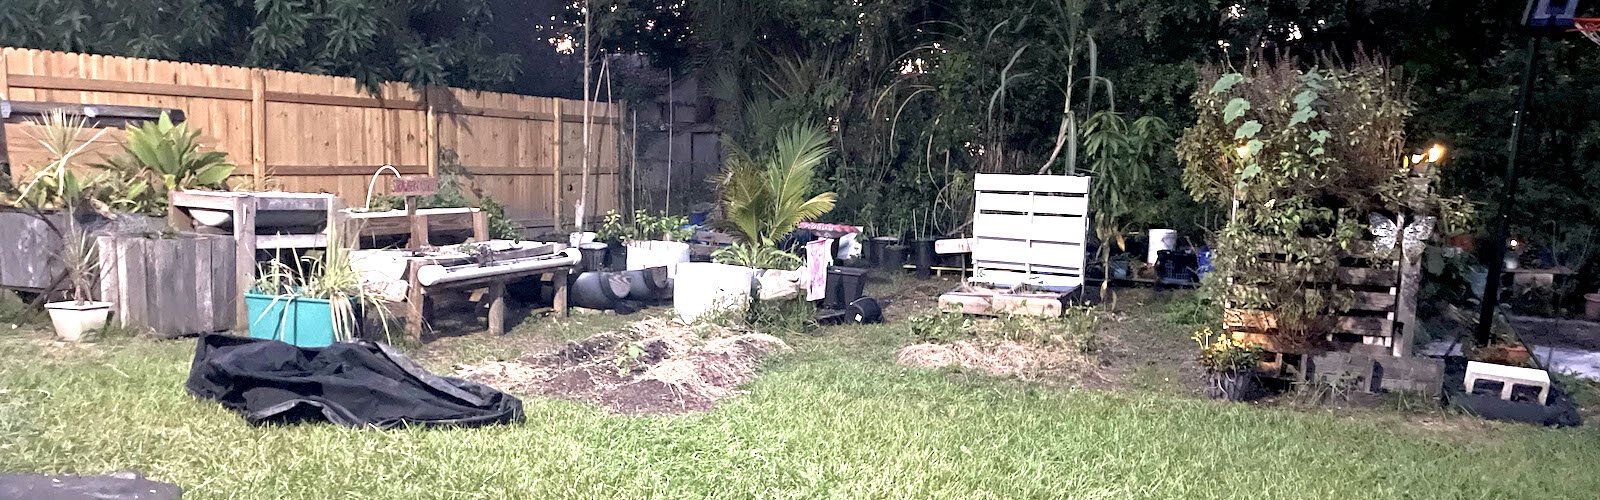 813 Hood Garden grows in a back yard in Sulphur Springs. The Founder, Dee Morales, would like to find space for a community garden in East Tampa.